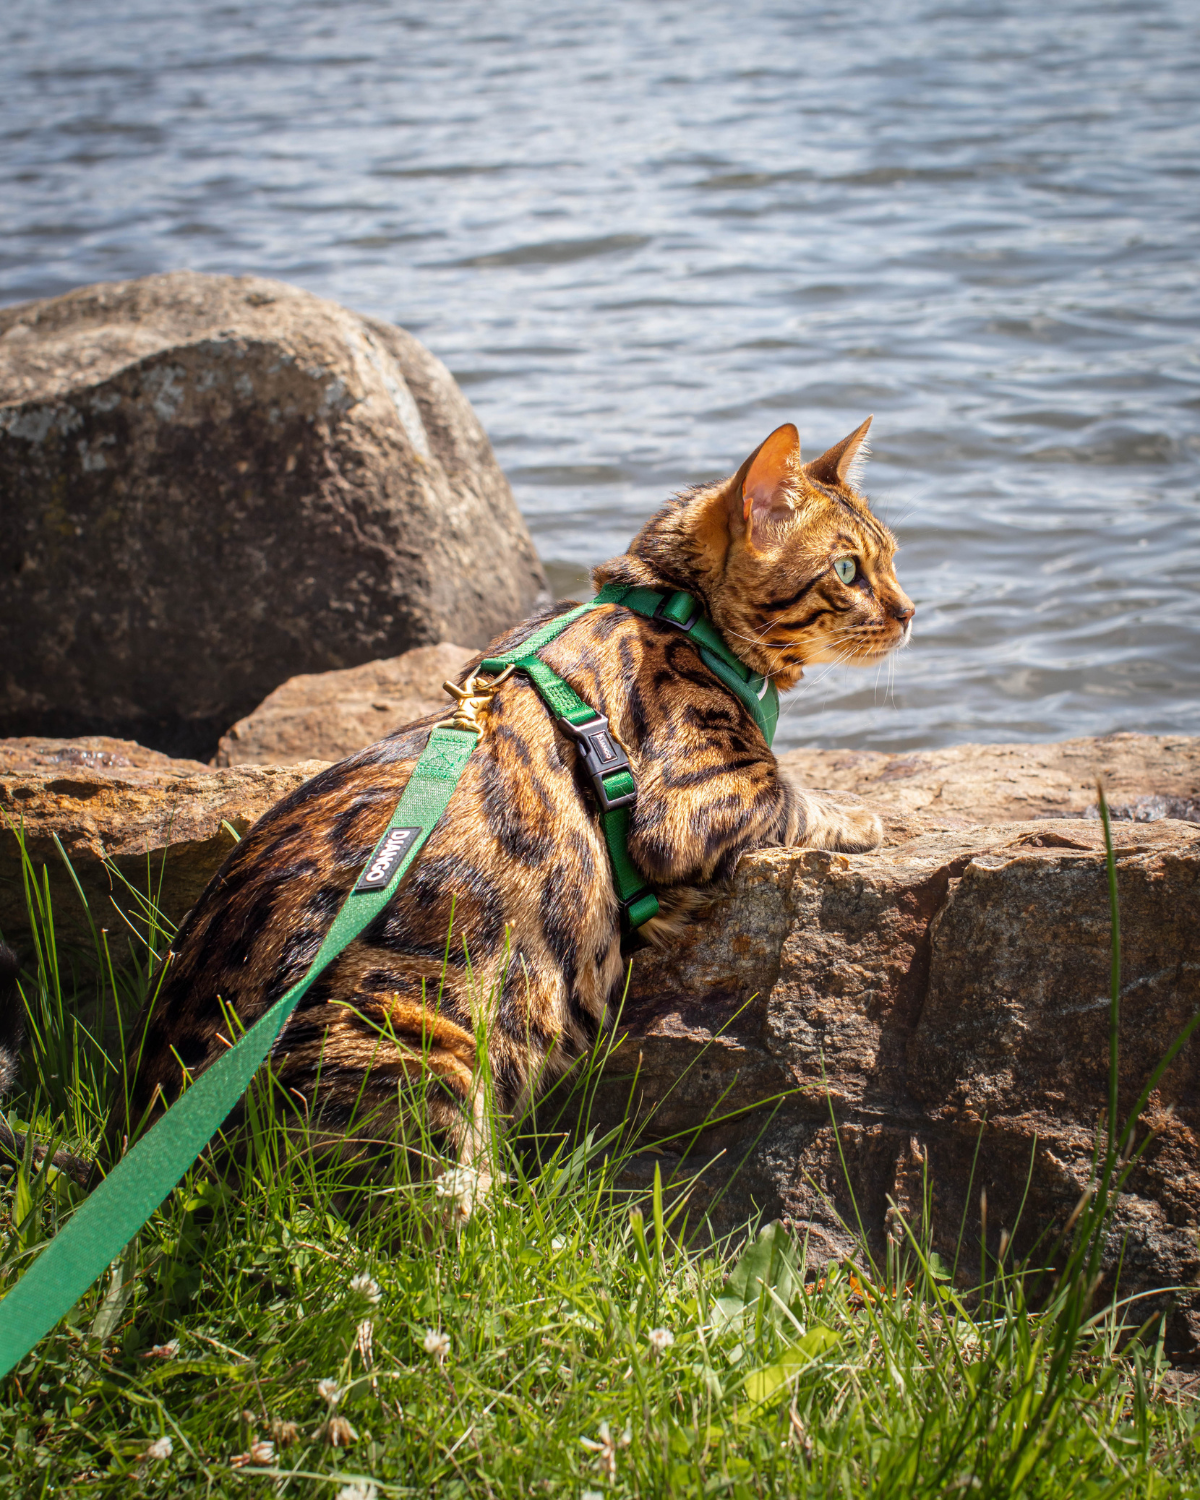 Loki is a Bengal cat and adventure cat and wears size small in DJANGO Adventure Cat Harnesses. DJANGO harnesses feature a padded and lightweight body, soft custom webbing for max comfort, a breathable sport mesh lining, reflective piping, and a beautiful solid cast brass D-ring. - djangobrand.com